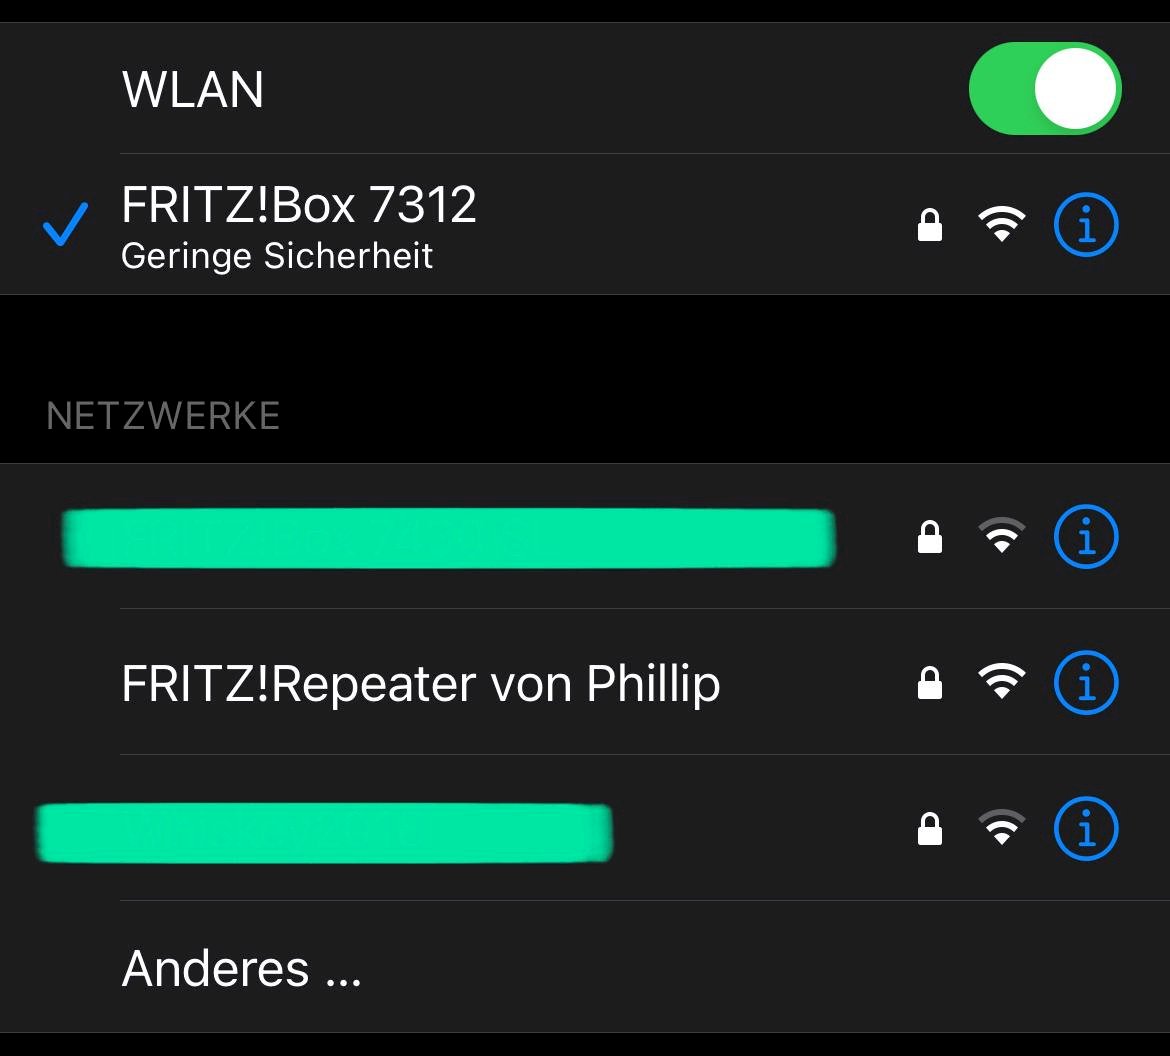 WLAN is constantly disconnecting FRITZ Box